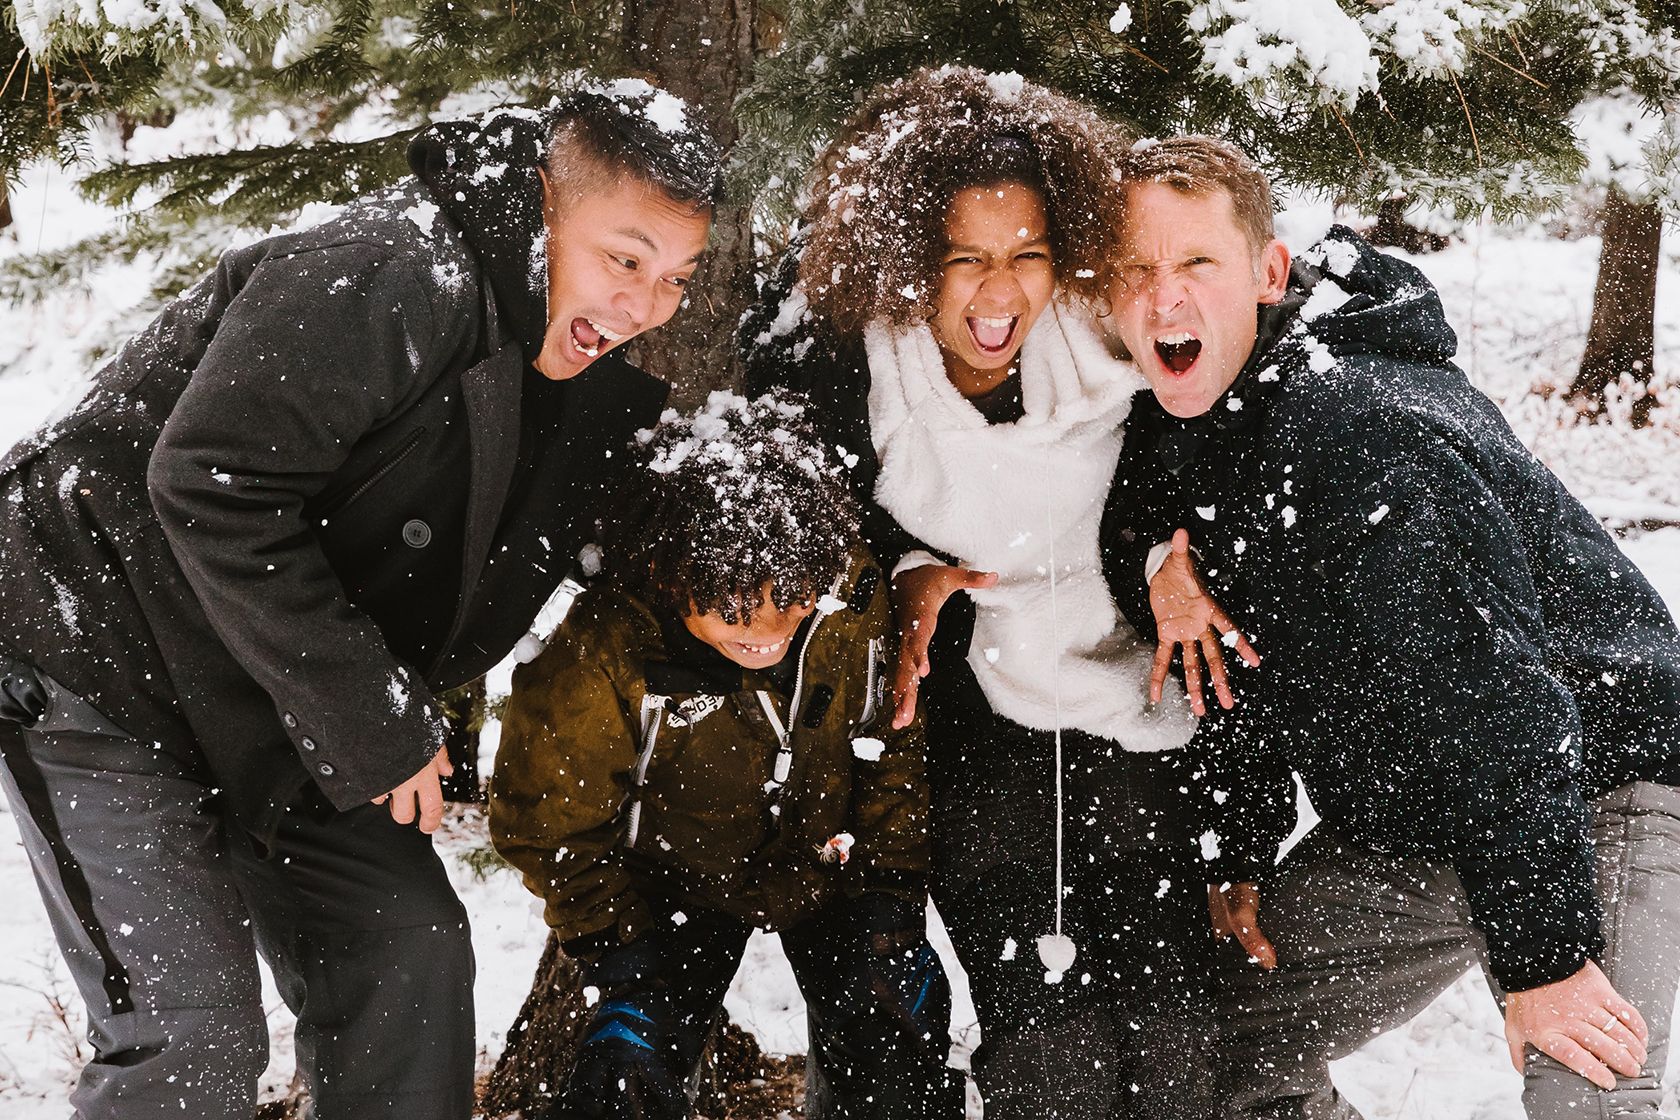 Four person family playing in snow.